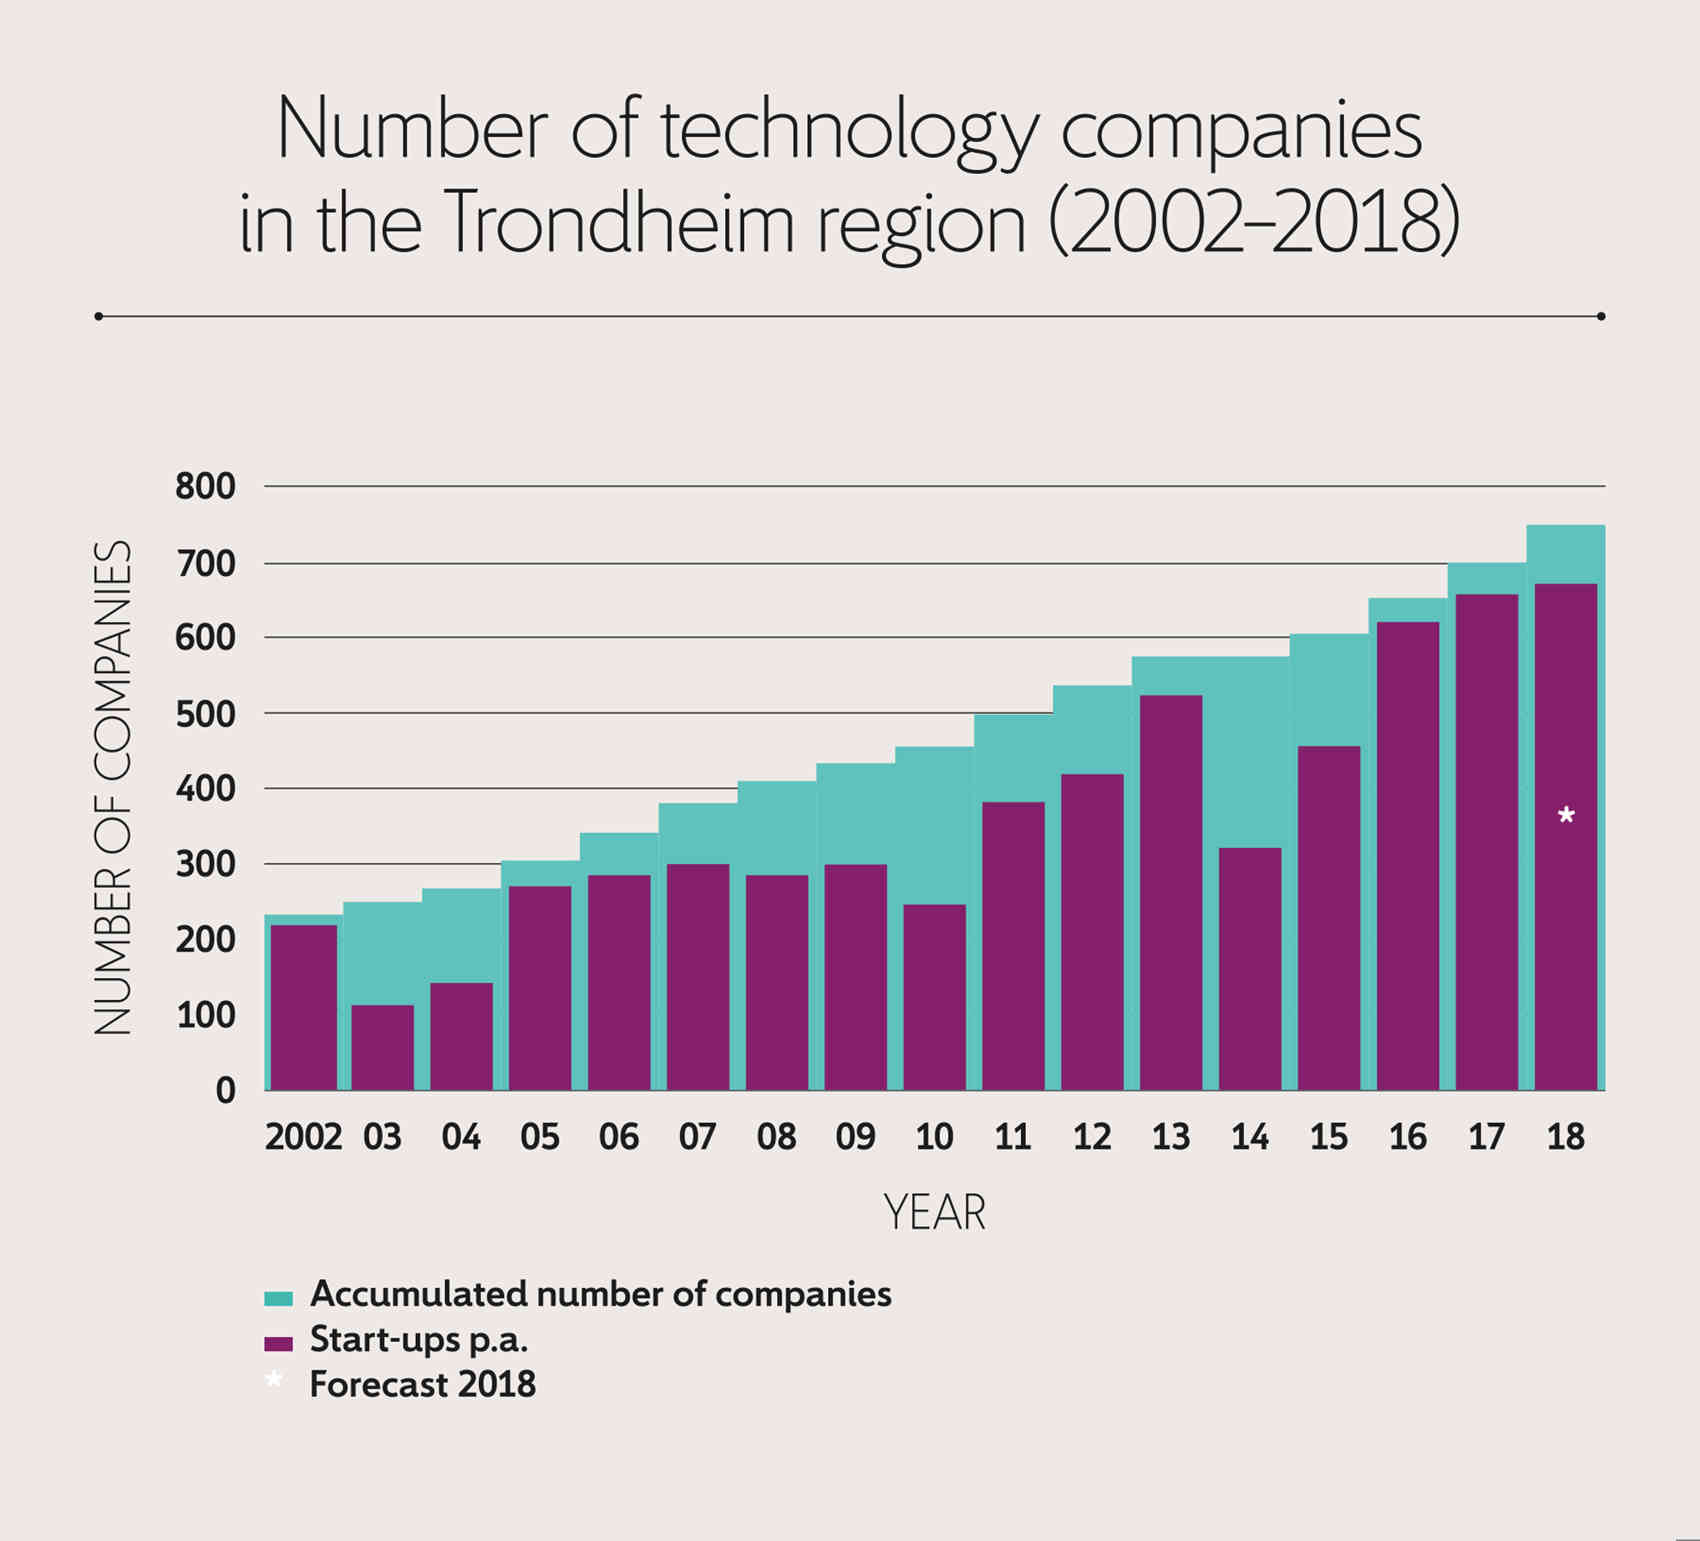 The number of technology companies (including start-ups) in the Trondheim region rose steadily from just over 200 in 2002 to more than 650 in 2018.